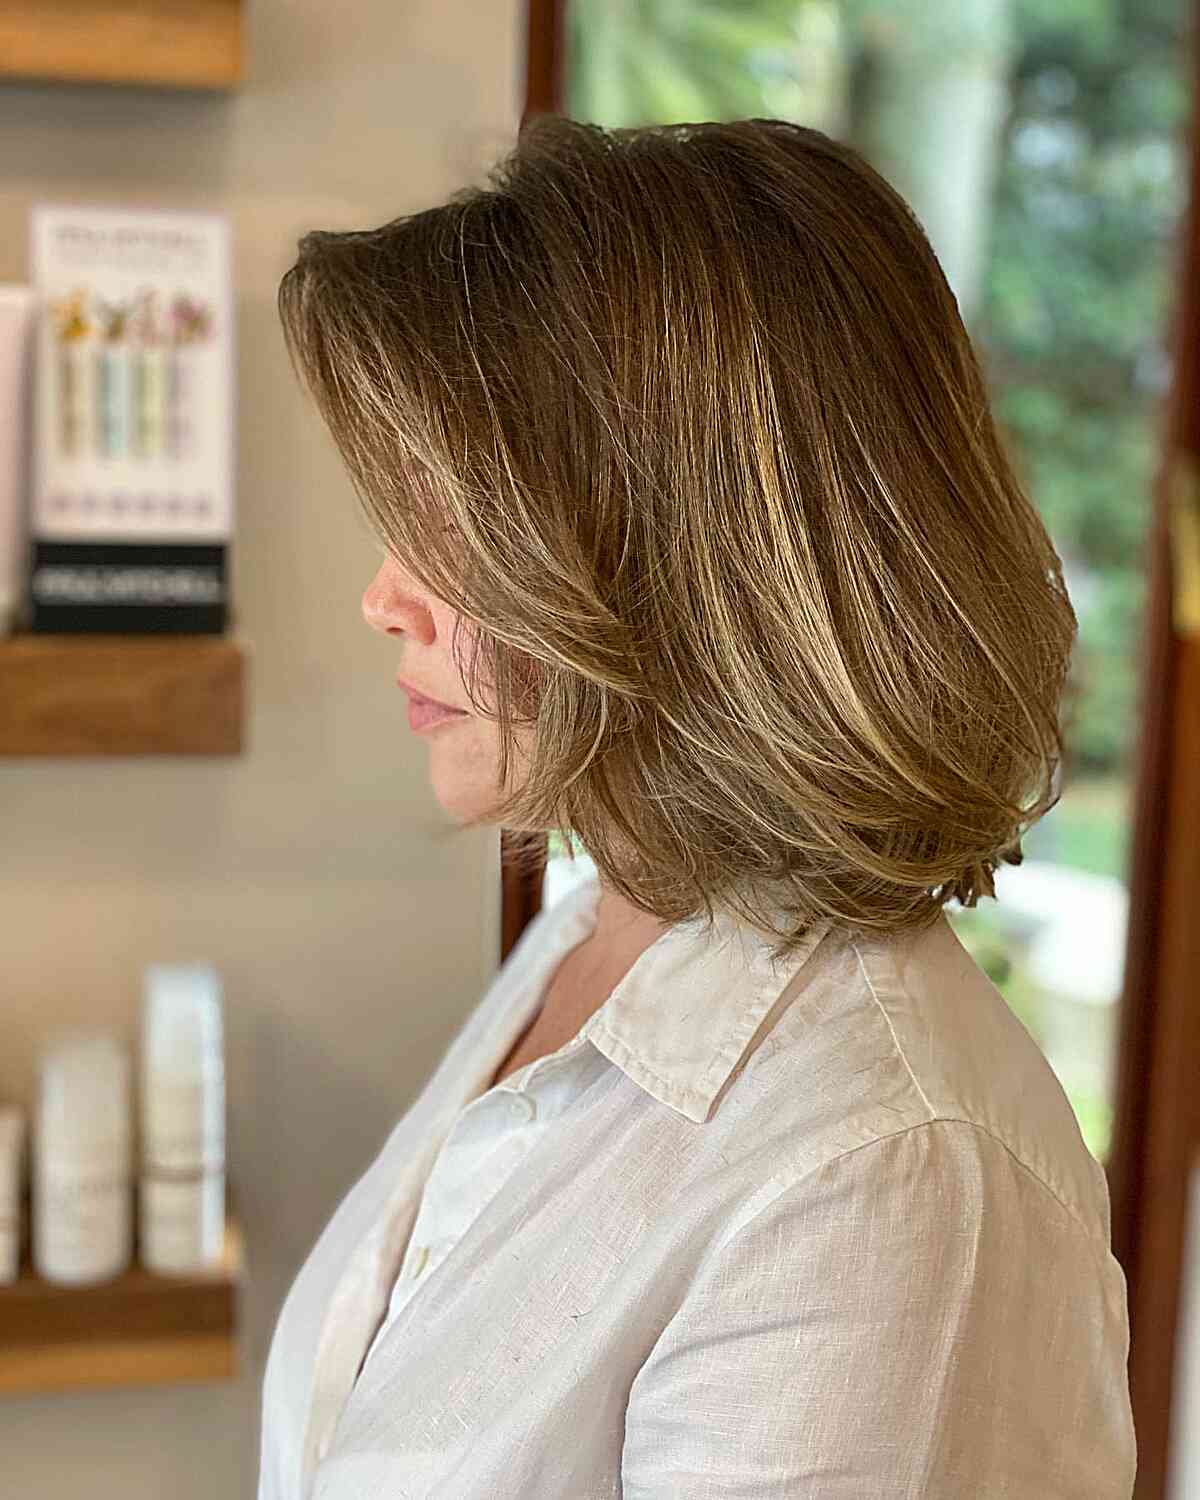 Shoulder-grazing bob with subtle Choppy Layers for Women Over 40